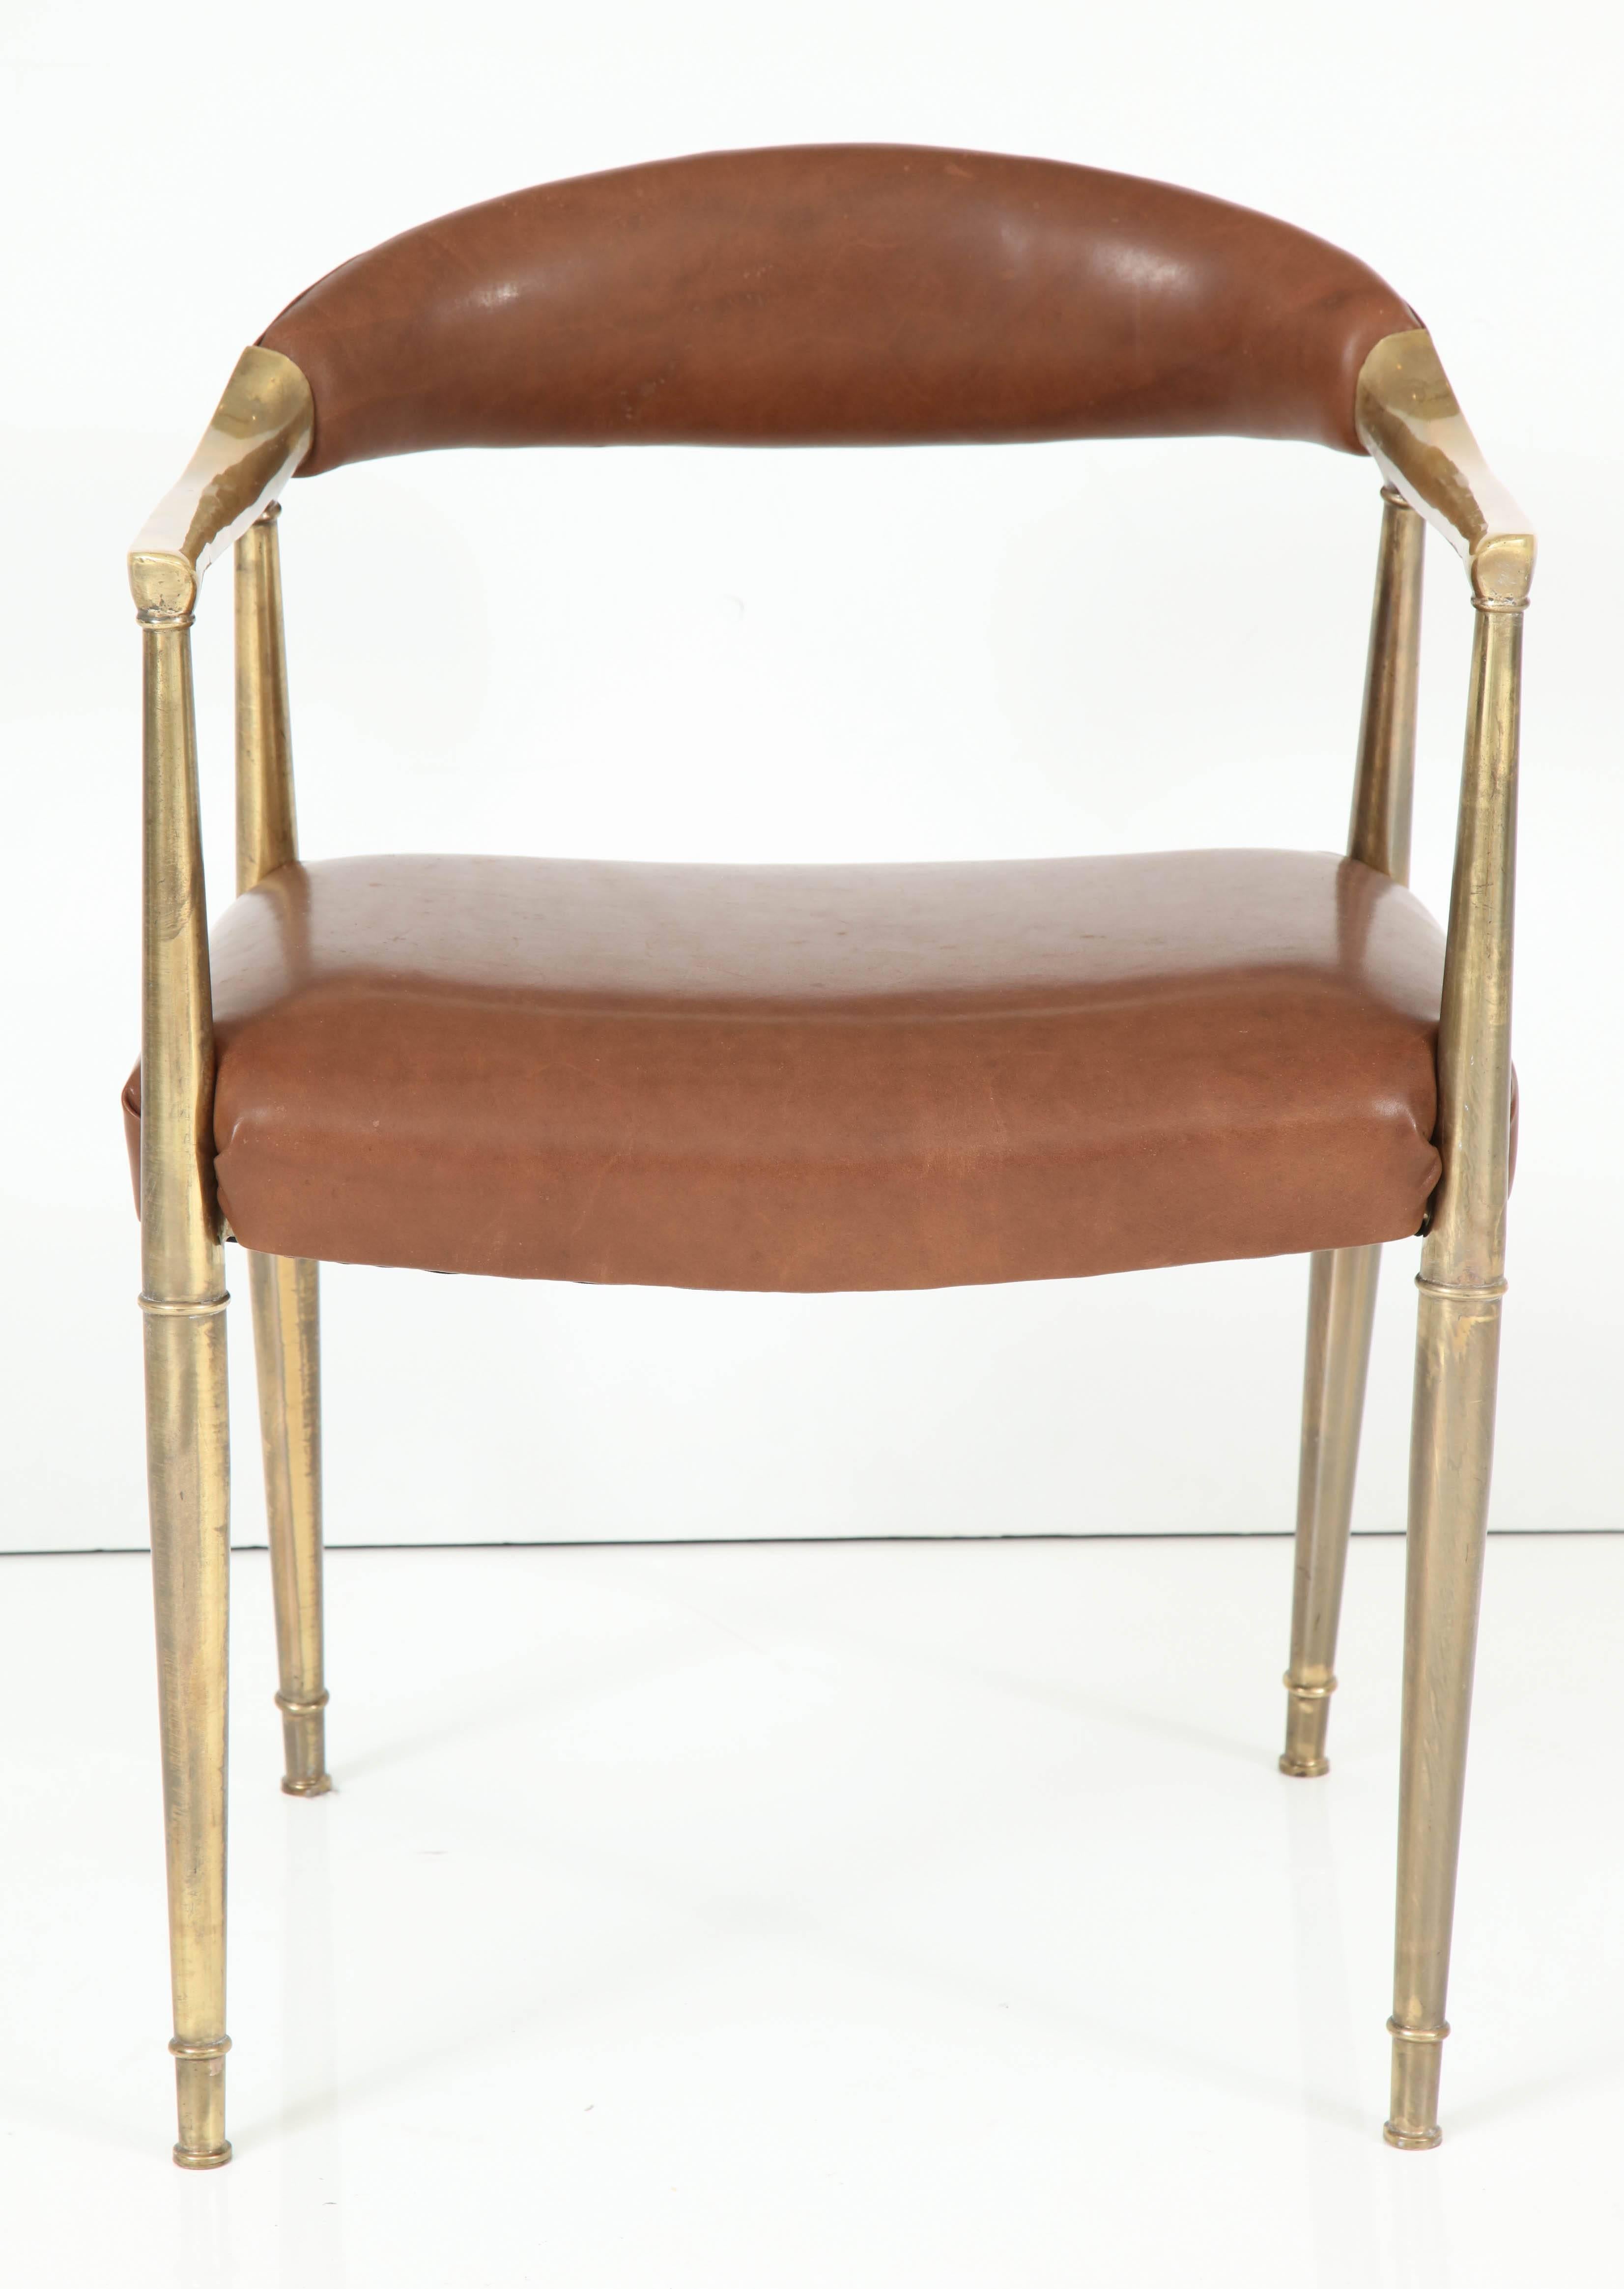 Italian Brass Armchair in Saddle Leather For Sale 4